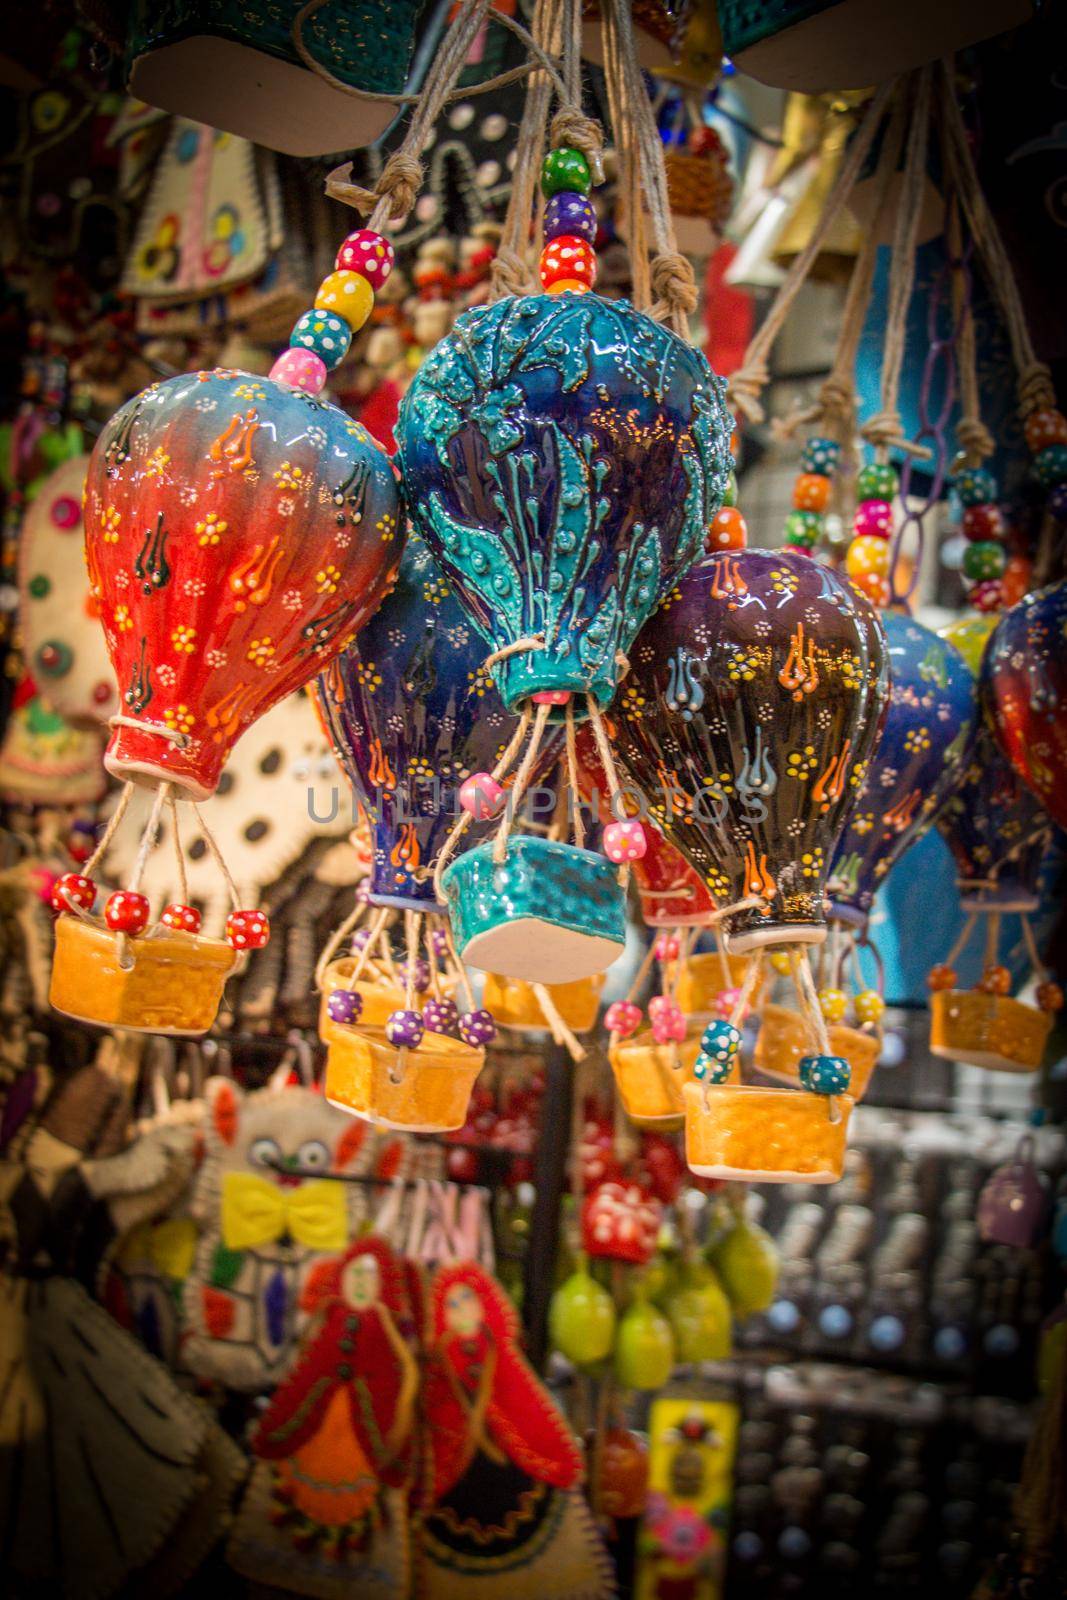 Little model colorful hot air balloons by berkay